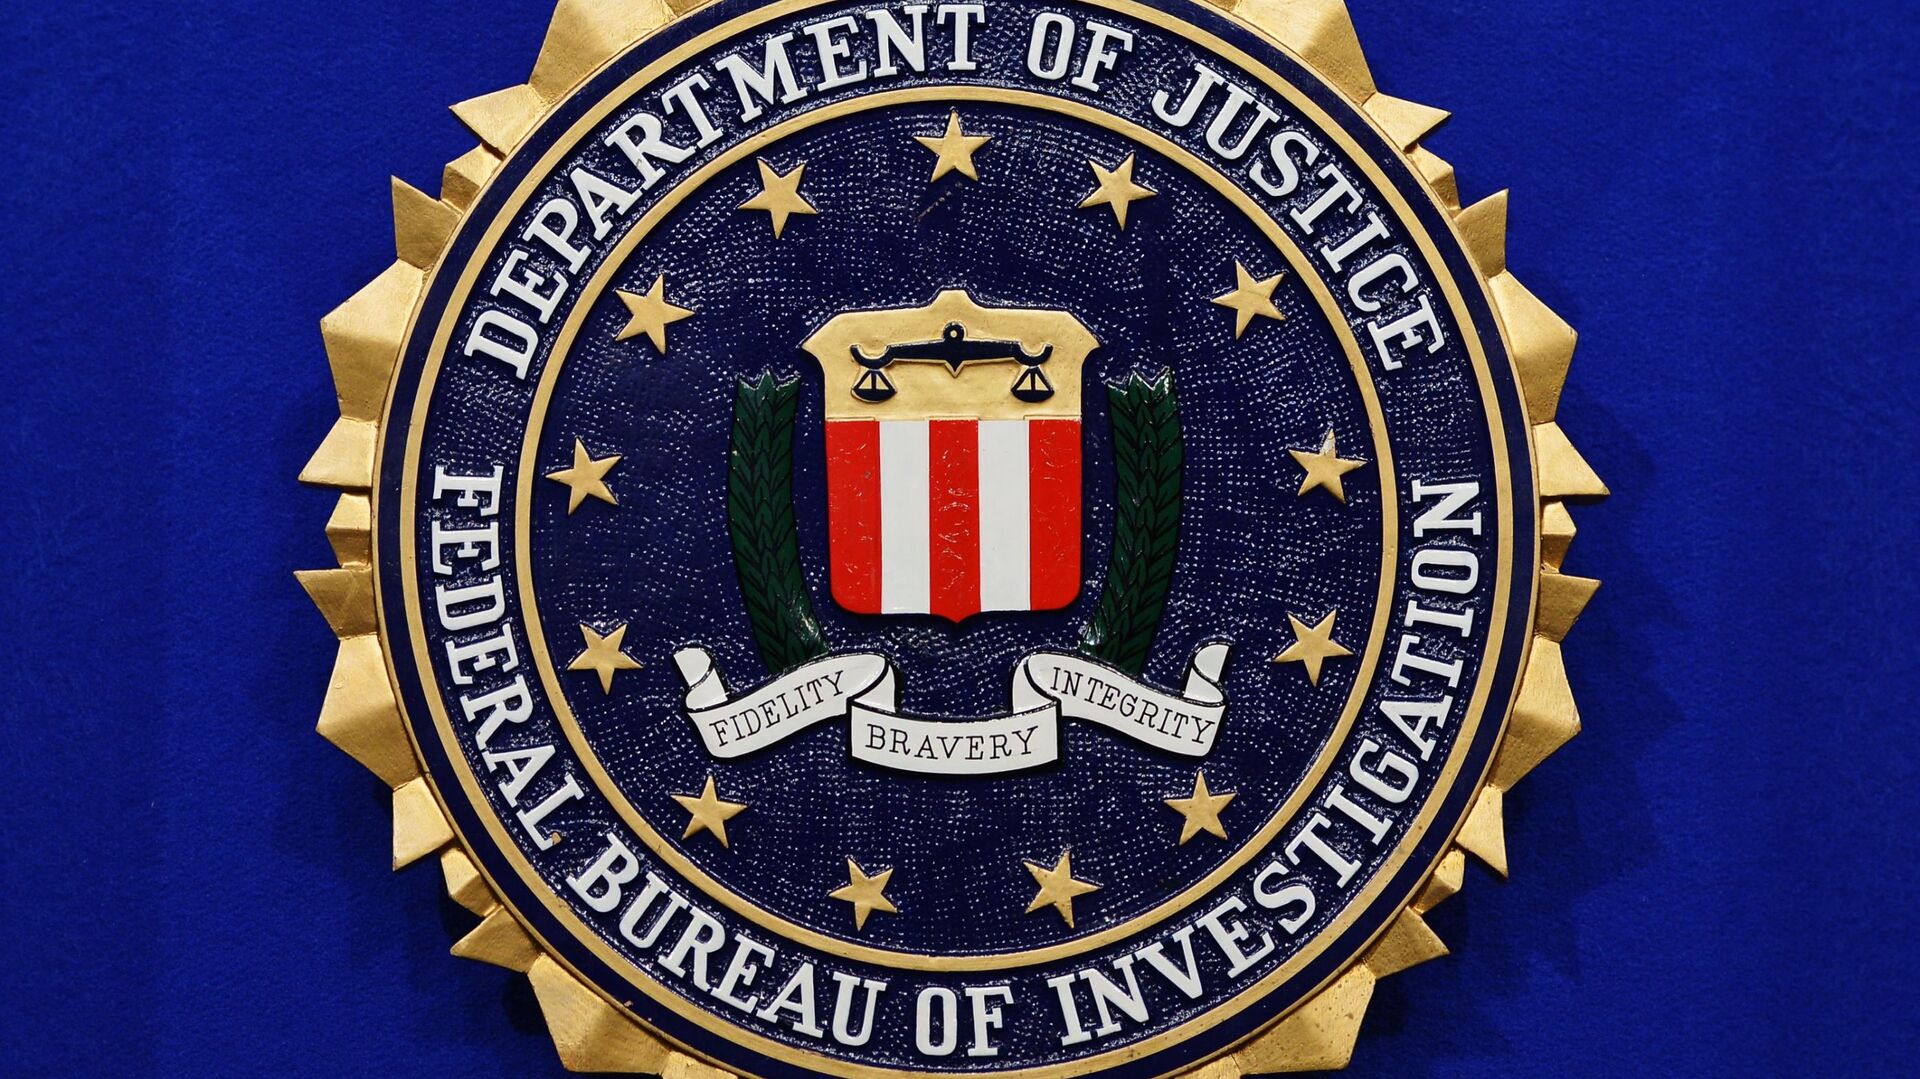 The Federal Bureau of Investigation (FBI) seal is seen on the lectern following a press conference announcing the FBI's 499th and 500th additions to the Ten Most Wanted Fugitives list on June 17, 2013 at the Newseum in Washington, DC.  - Sputnik International, 1920, 29.03.2022